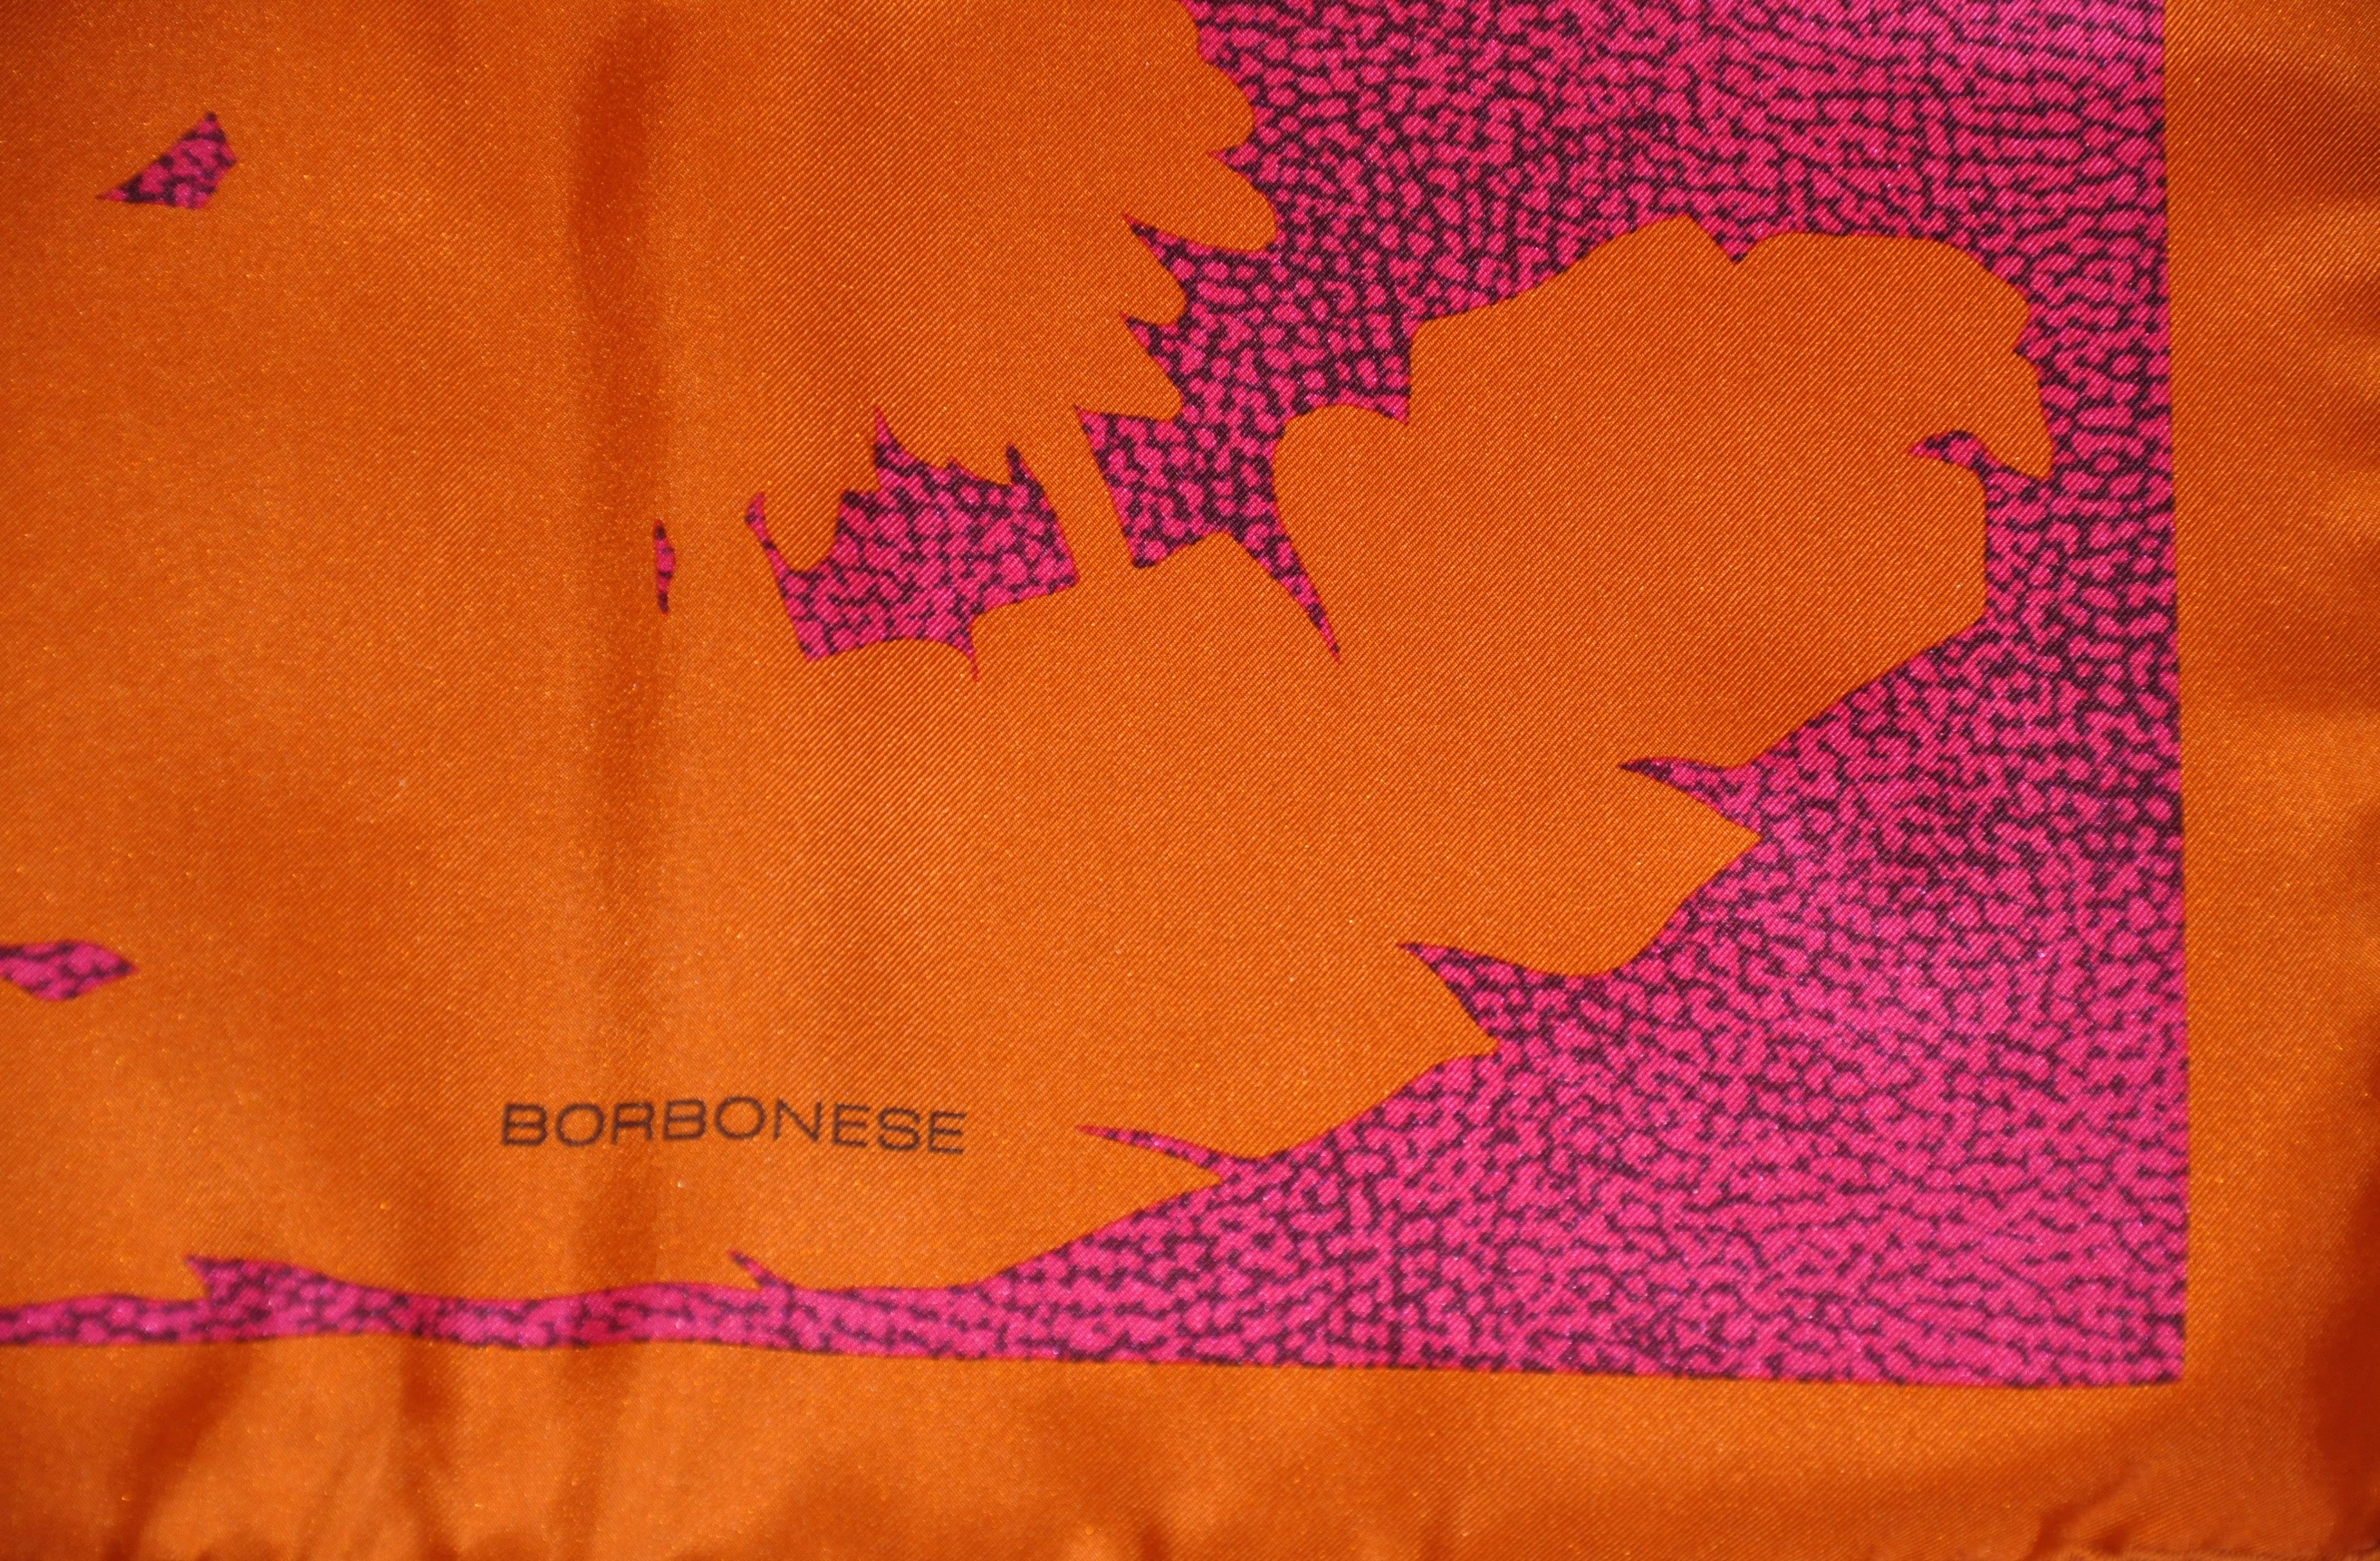         Borbonese wonderful floral print silk scarf in bold fuchsia & tangerine makes for a classic and elegant scarf. The scarf is finished with hand-rolled edges still with original tags attached. Made in Italy, measuring 34